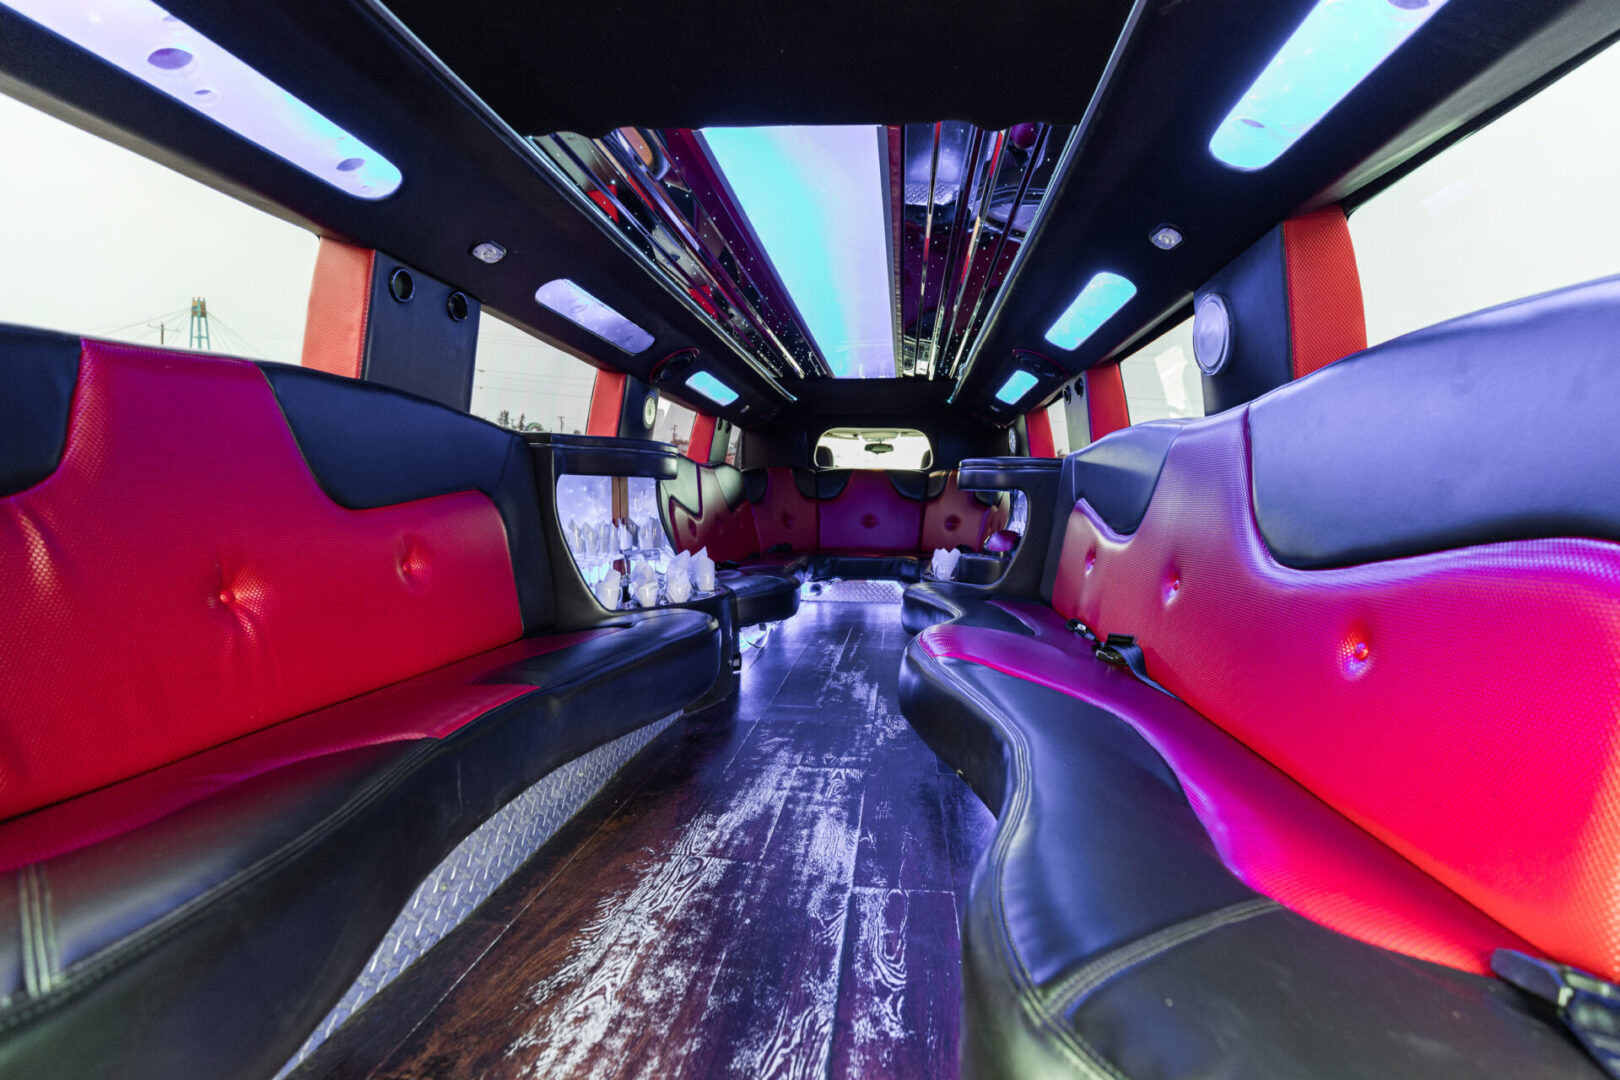 A view of the inside of a limo car.